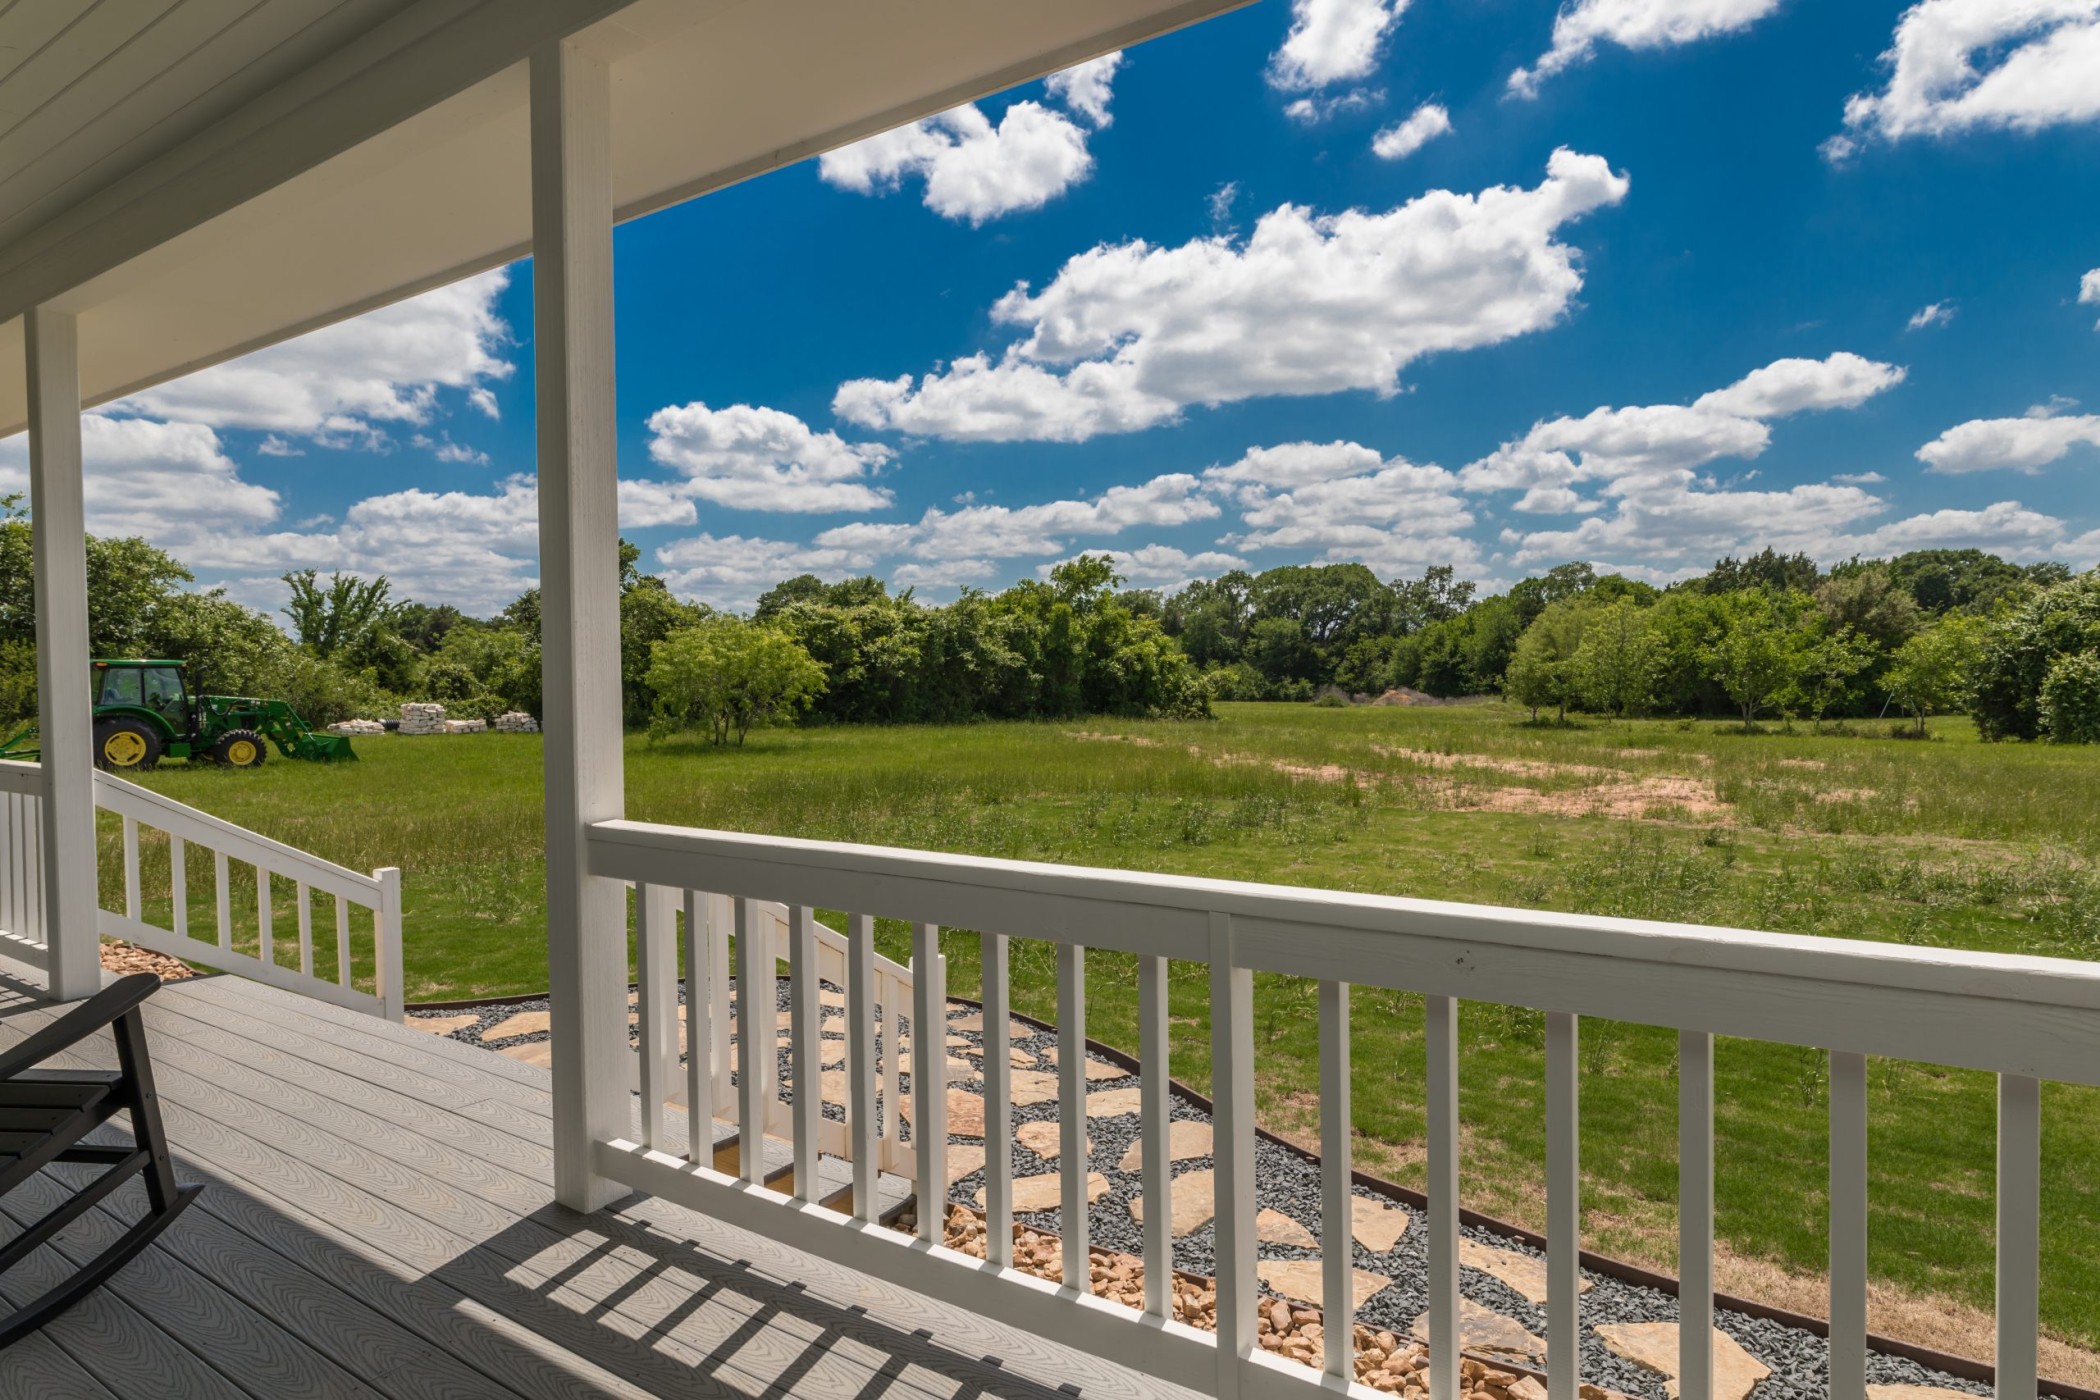 The view from the porch of a LaFollette Custom Build home in Bryan College Station.